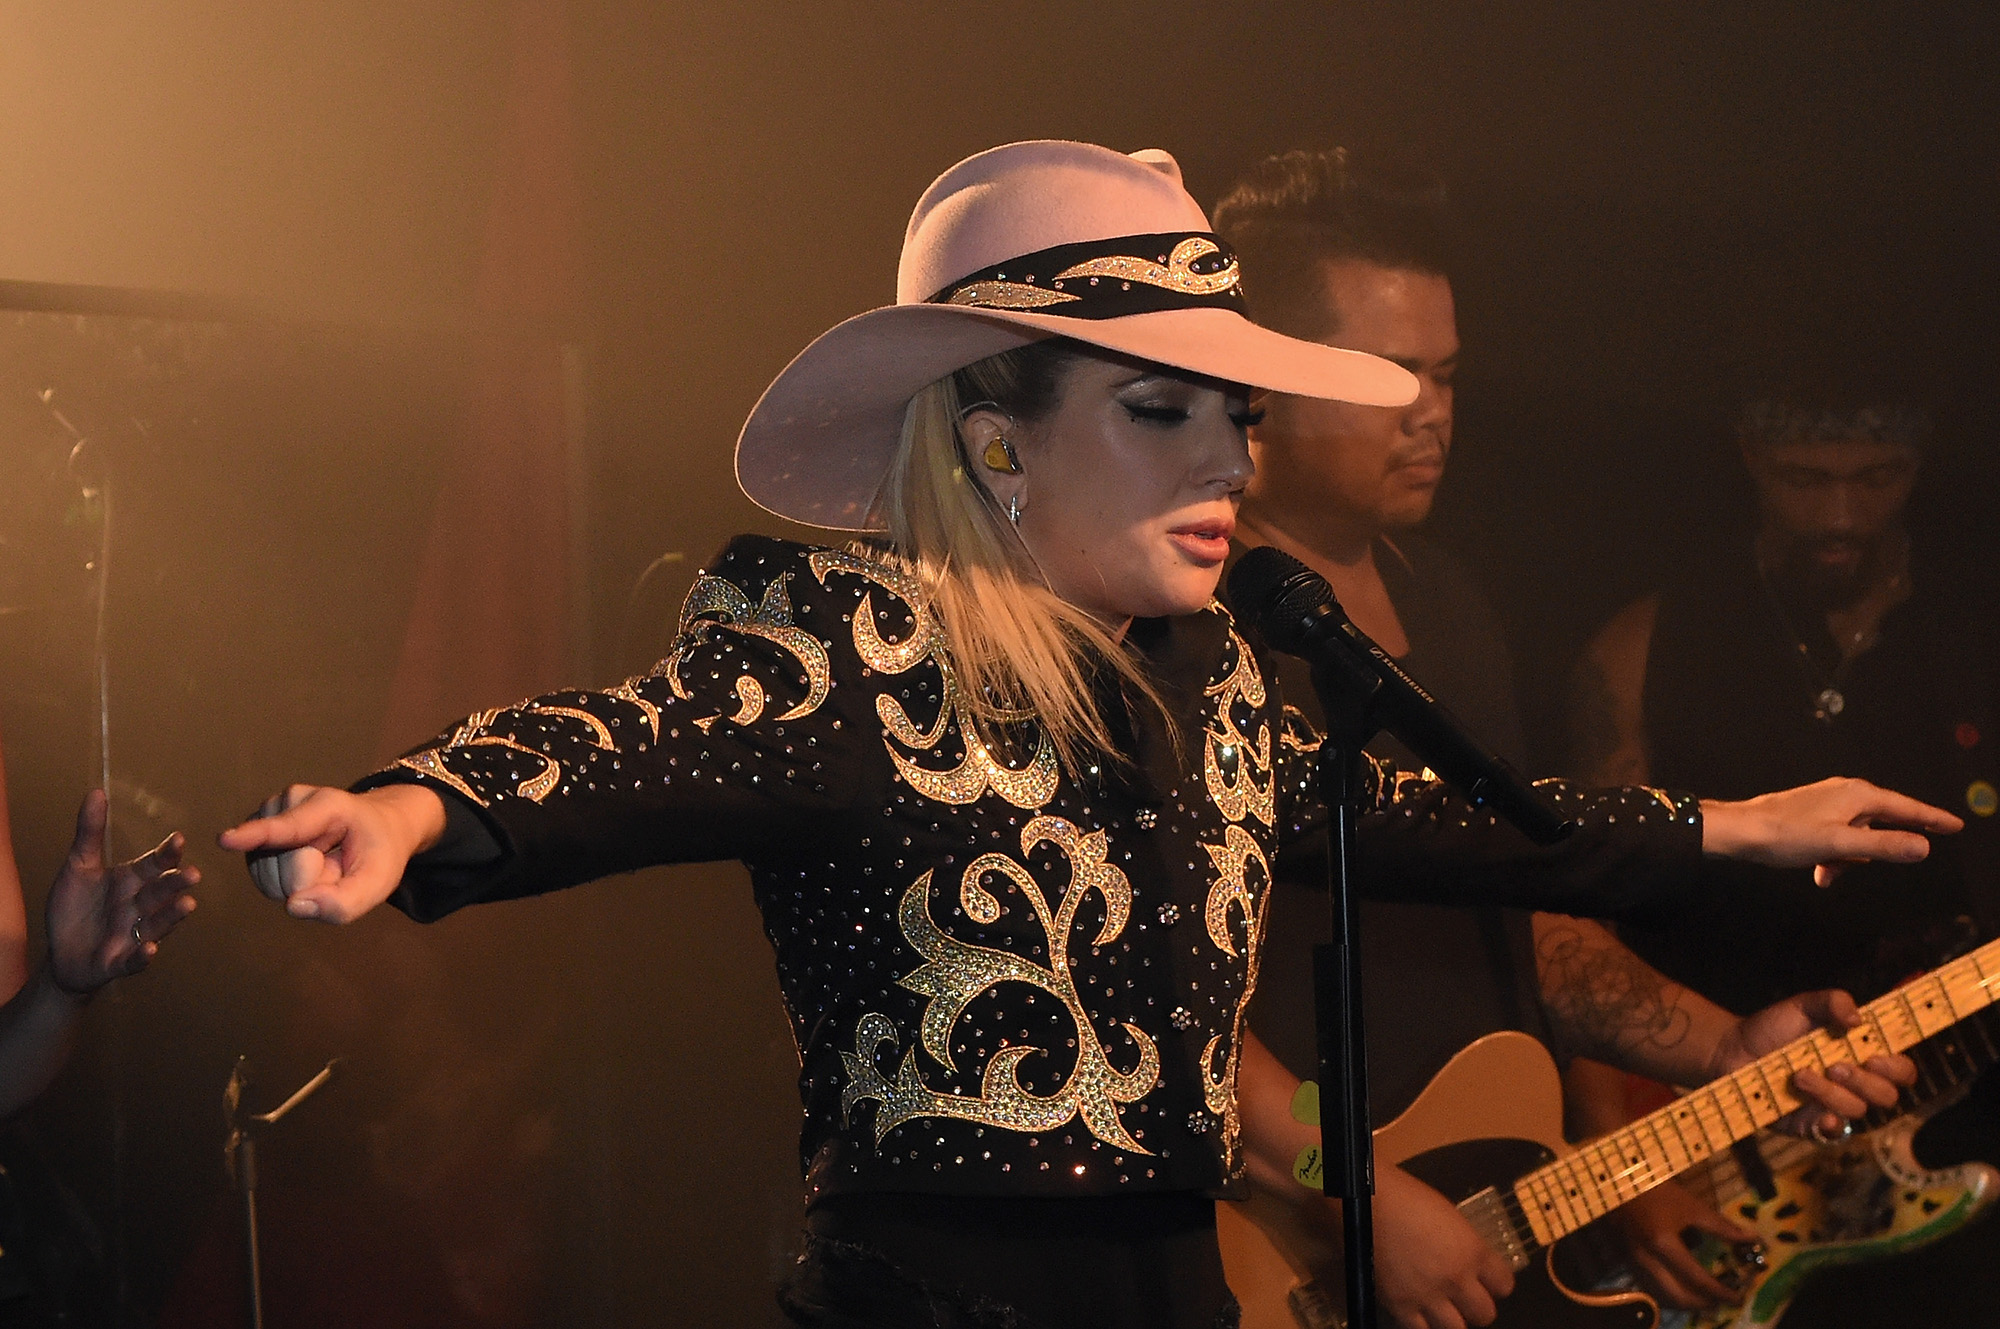 Lady Gaga surprises fans while on the Bud Light x Lady Gaga Dive Bar Tour at the 5 Spot where the singer performed three new tracks off her upcoming album "Joanne" on October 05, 2016 in Nashville, Tennessee.  (Photo by Rick Diamond/Getty Images for Bud Light) (Rick Diamond&mdash;Getty Images for Bud Light)